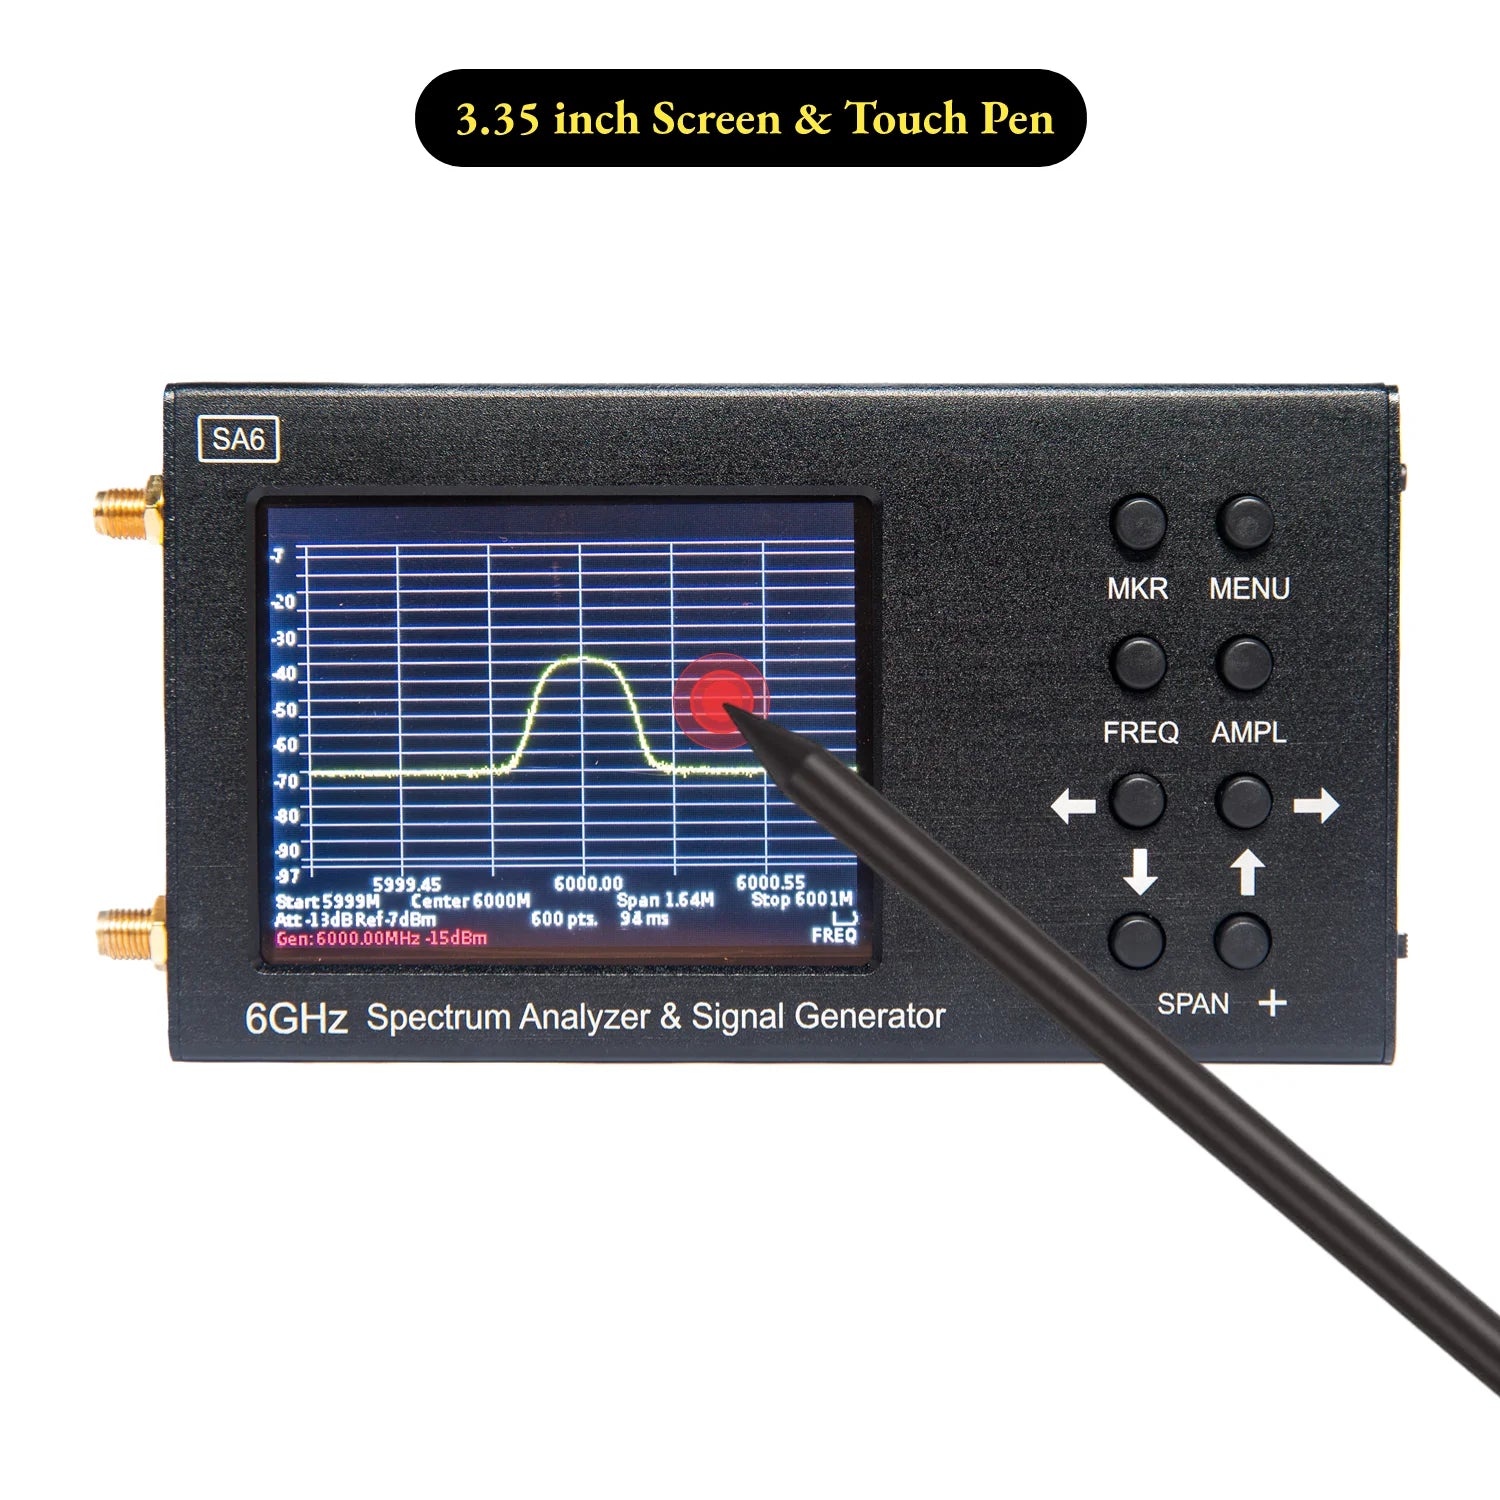 35MHz to 6.2GHz Handheld Spectrum Analyzer SA6 with 3.2" Touchscreen,Built-in Signal Generator,Measuring Radio Frequency Signals